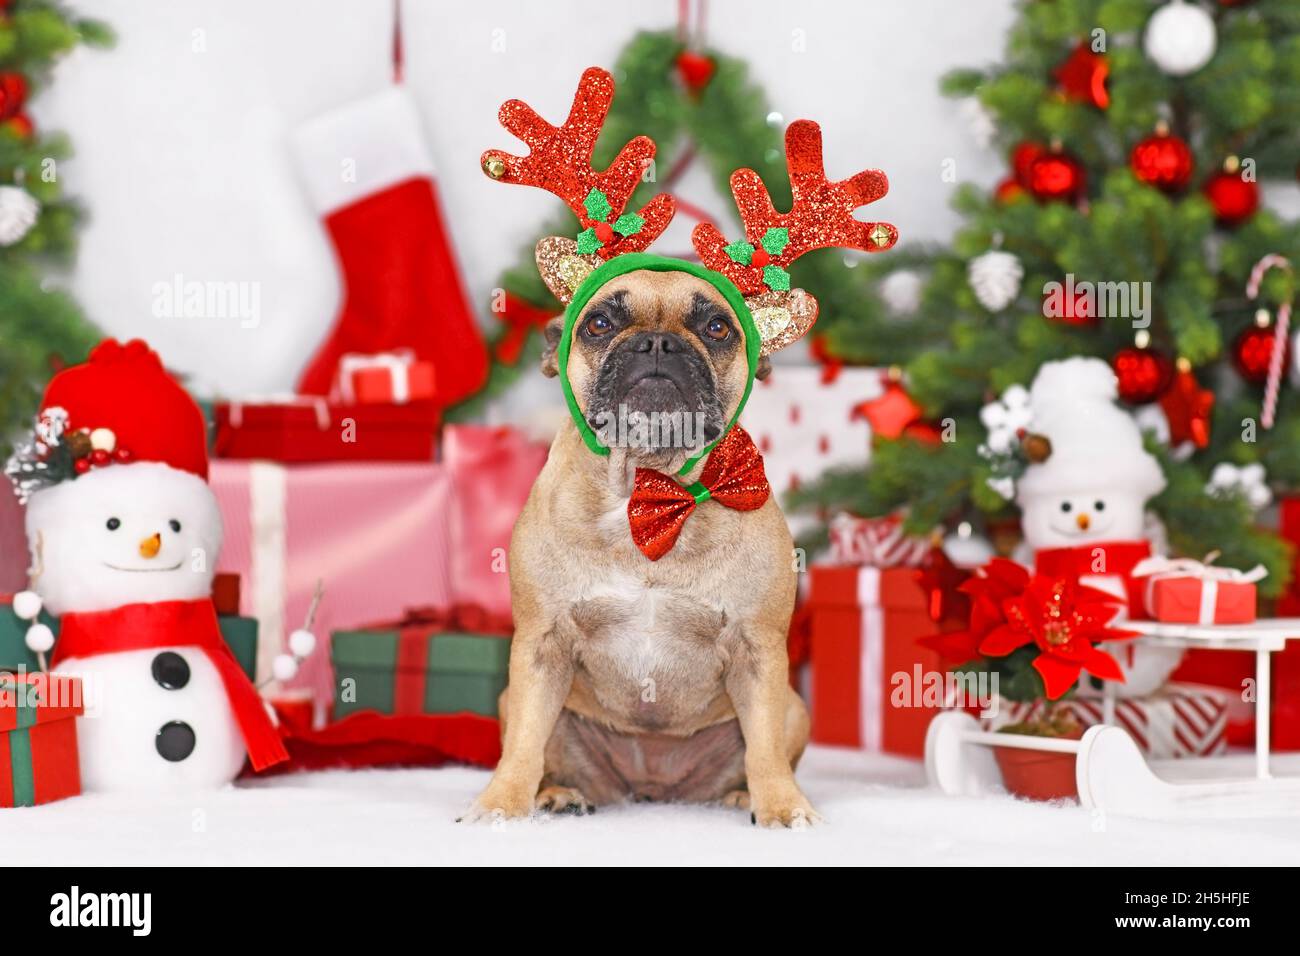 Reindeer Christmas costume dog. French Bulldog wearing antlers sitting in front of Christmas trees and gift boxes Stock Photo